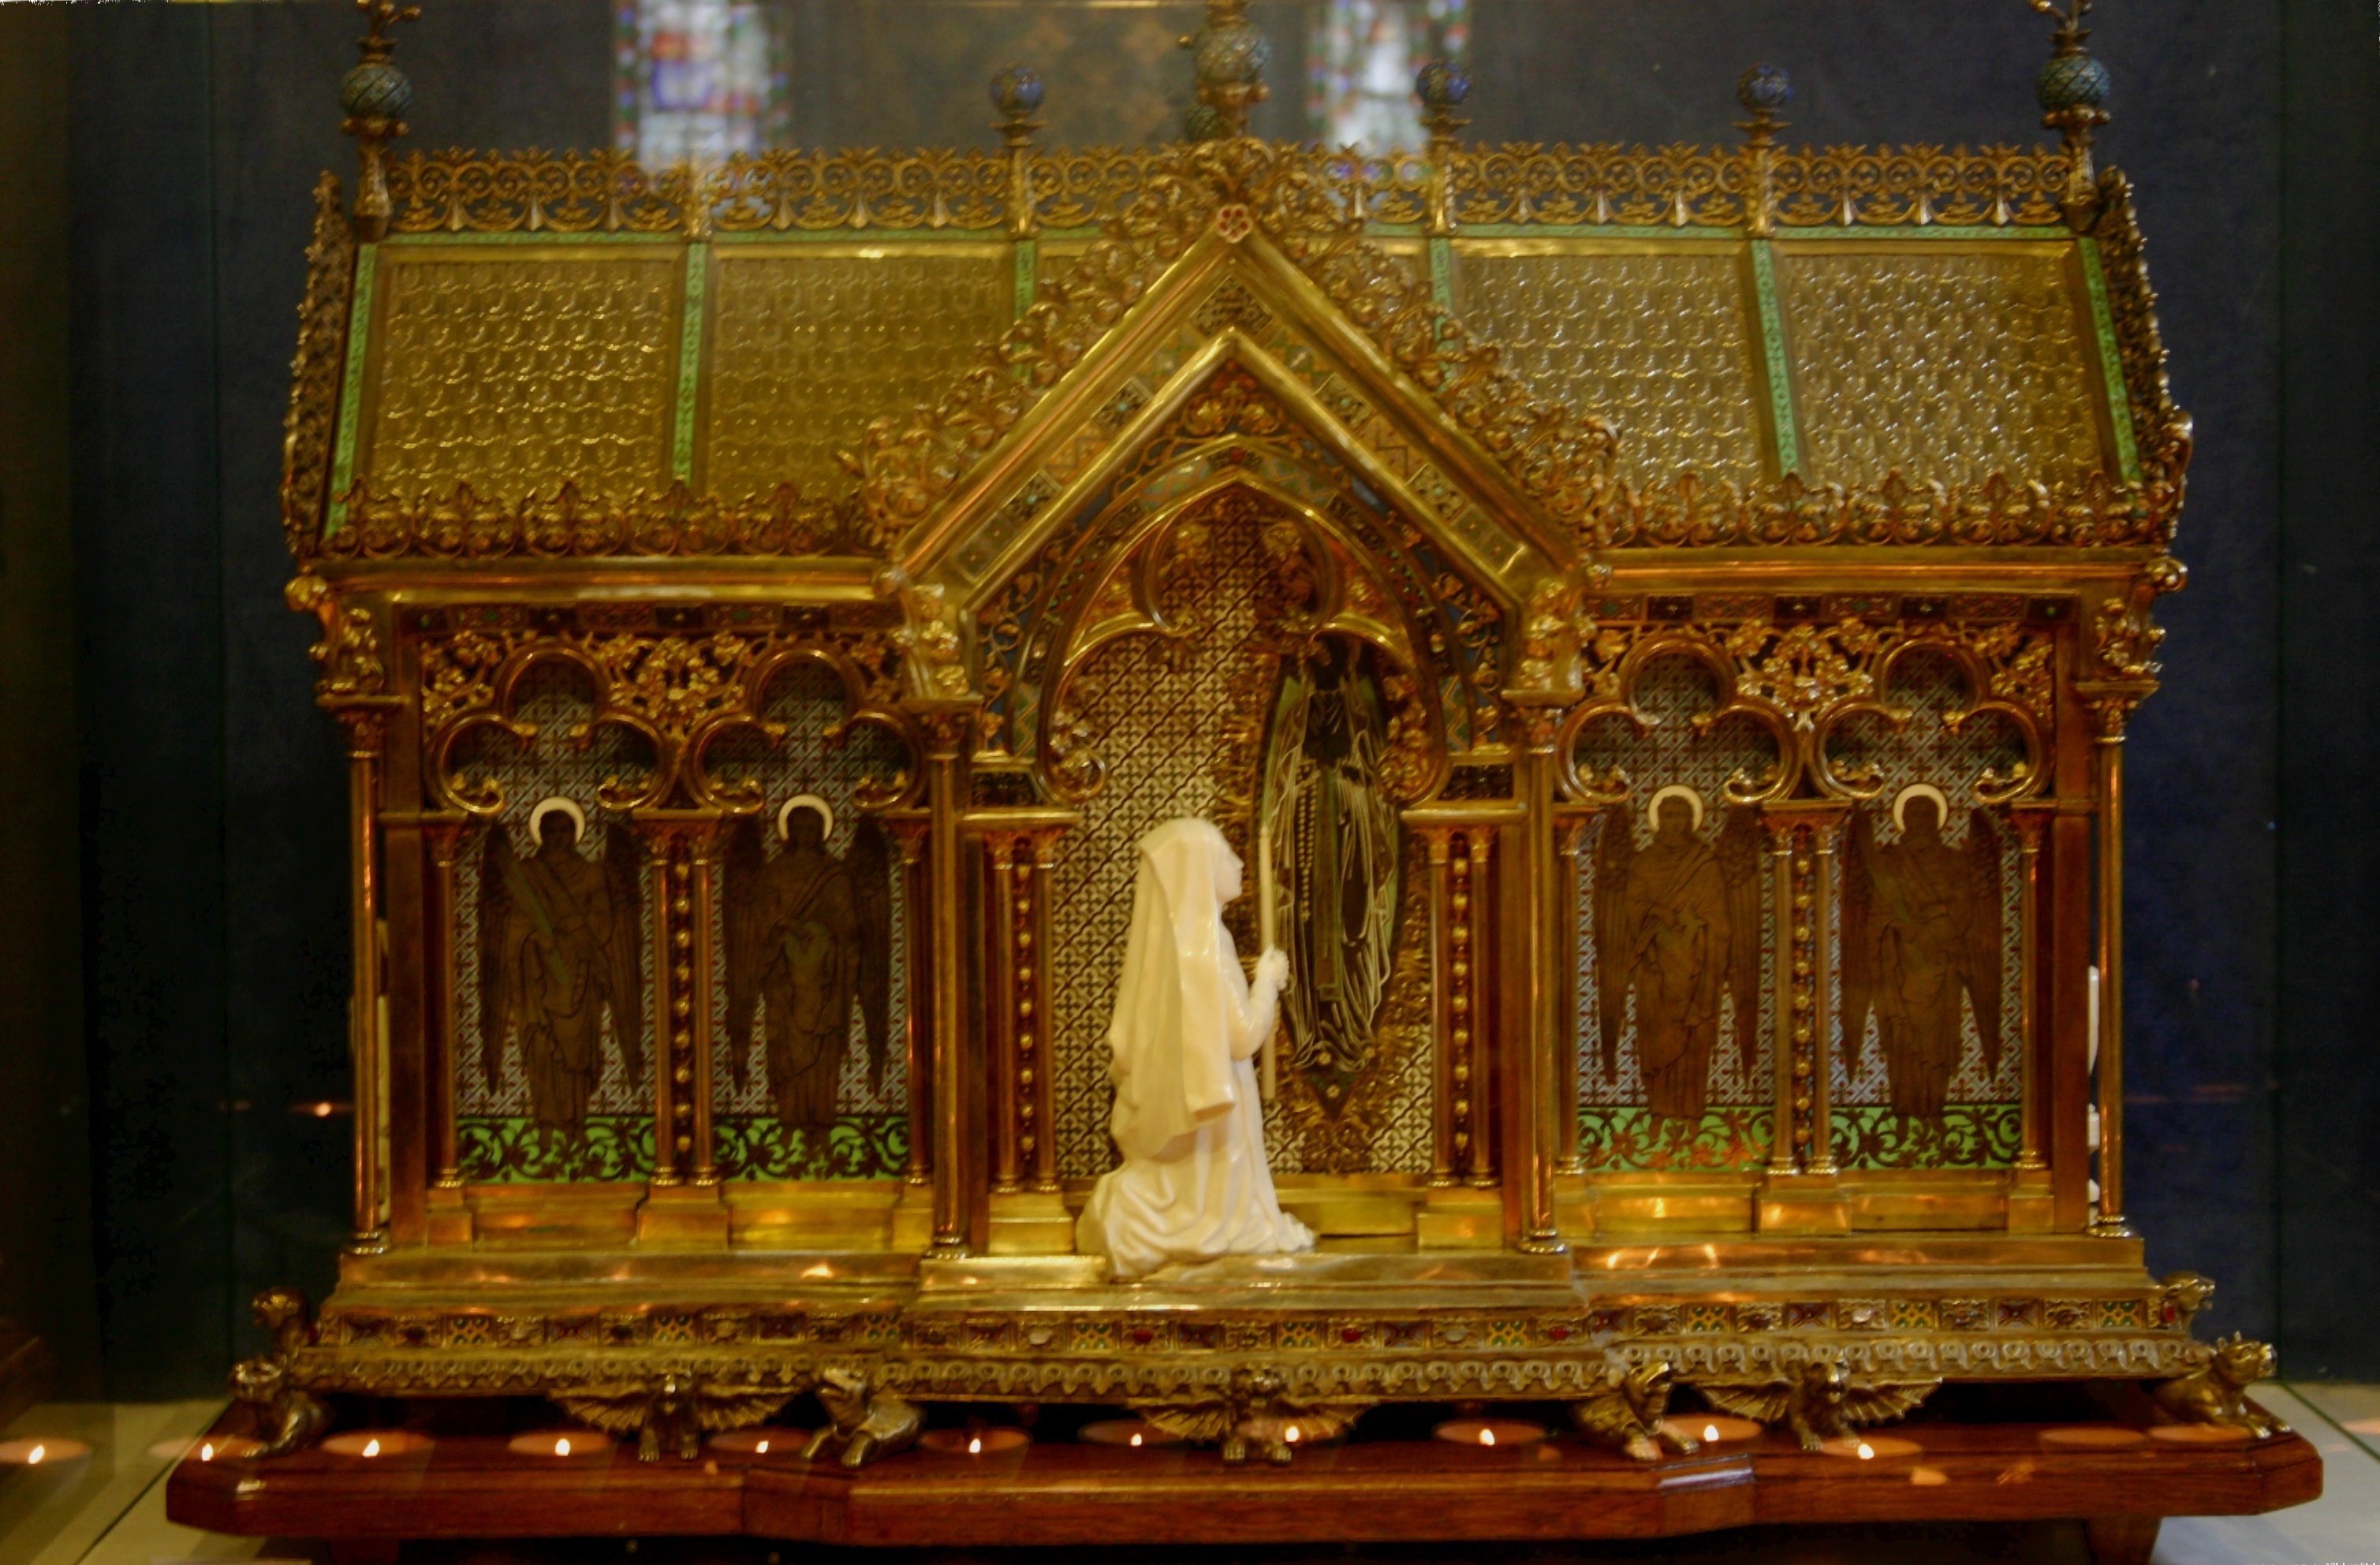 Reliquary_of_St._Bernadette_Soubirous_-_Basilica_of_the_Immaculate_Conception_-_Lourdes_2014